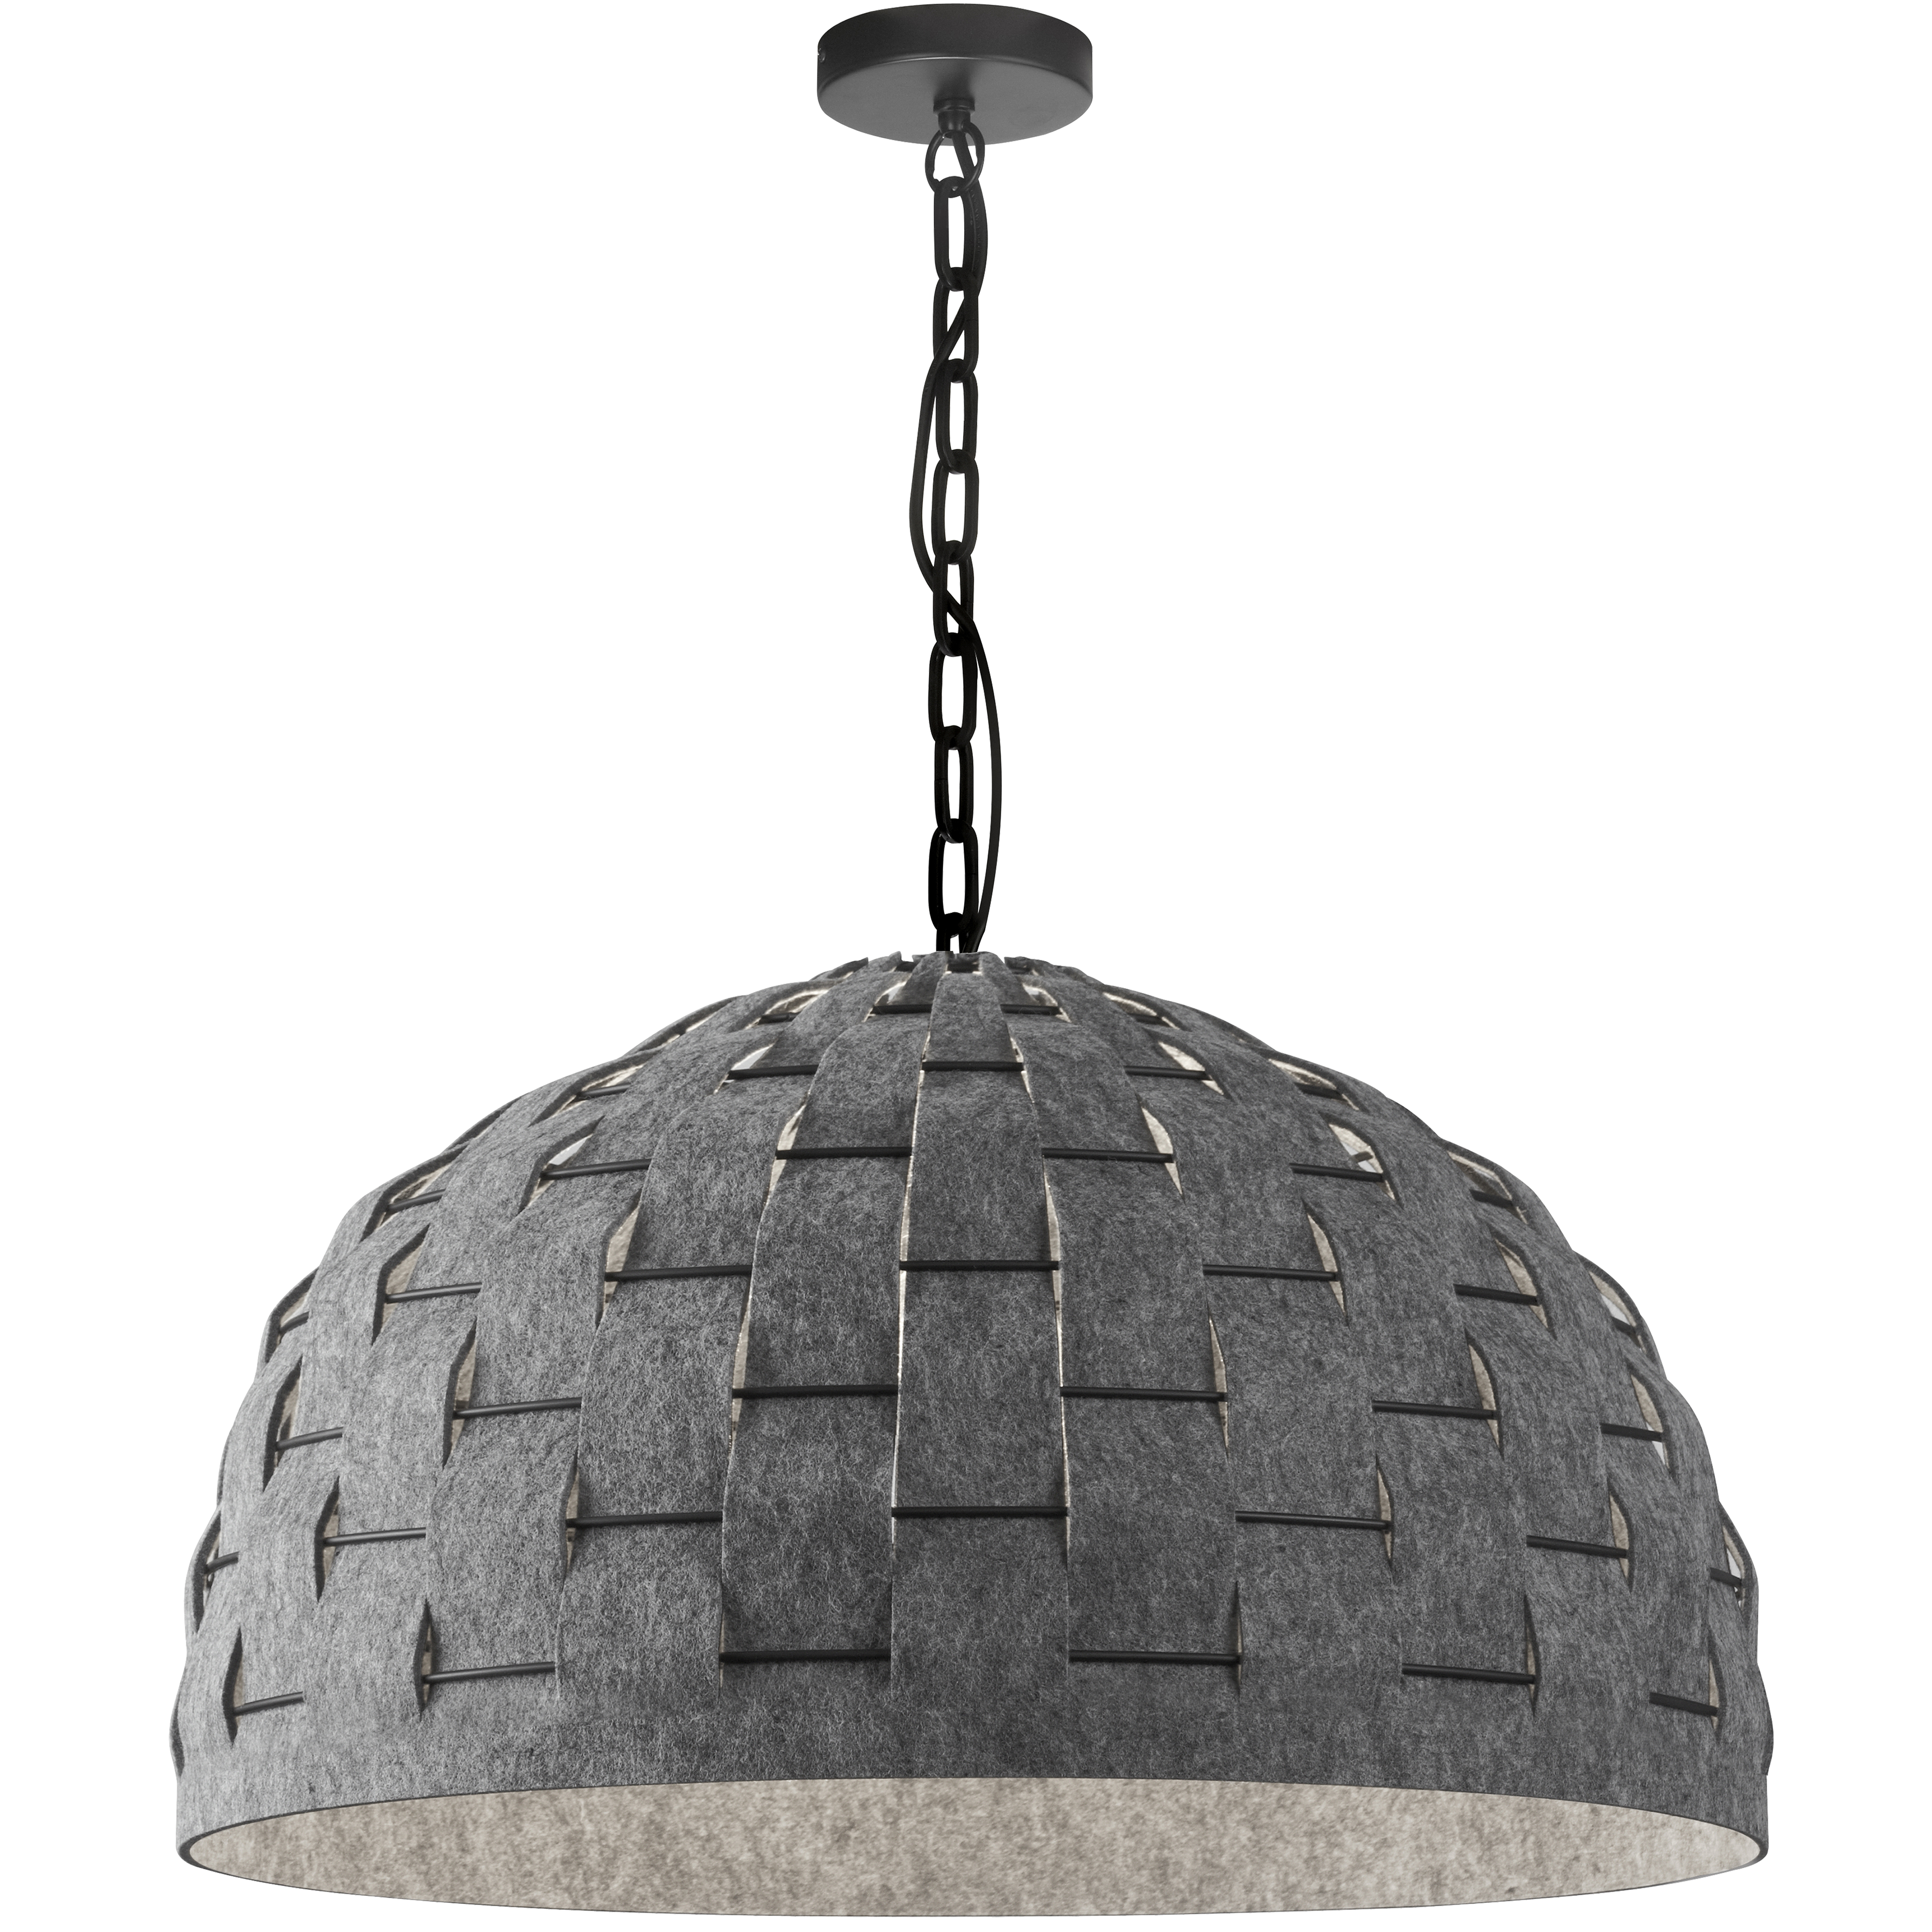 Fashionably funky, the Priscilla family of lighting adds textural as well as artisan-style appeal to your home. It's a creative variation on the classic dome shade, perfect for modern furnishings. The simple drop leads to a metal frame which an open work dome.  Soft gray felt is woven into the frame, creating a singular look that will draw attention to the room around it. Priscilla lighting adds a focal point to kitchens, dinettes or a main foyer of your home.